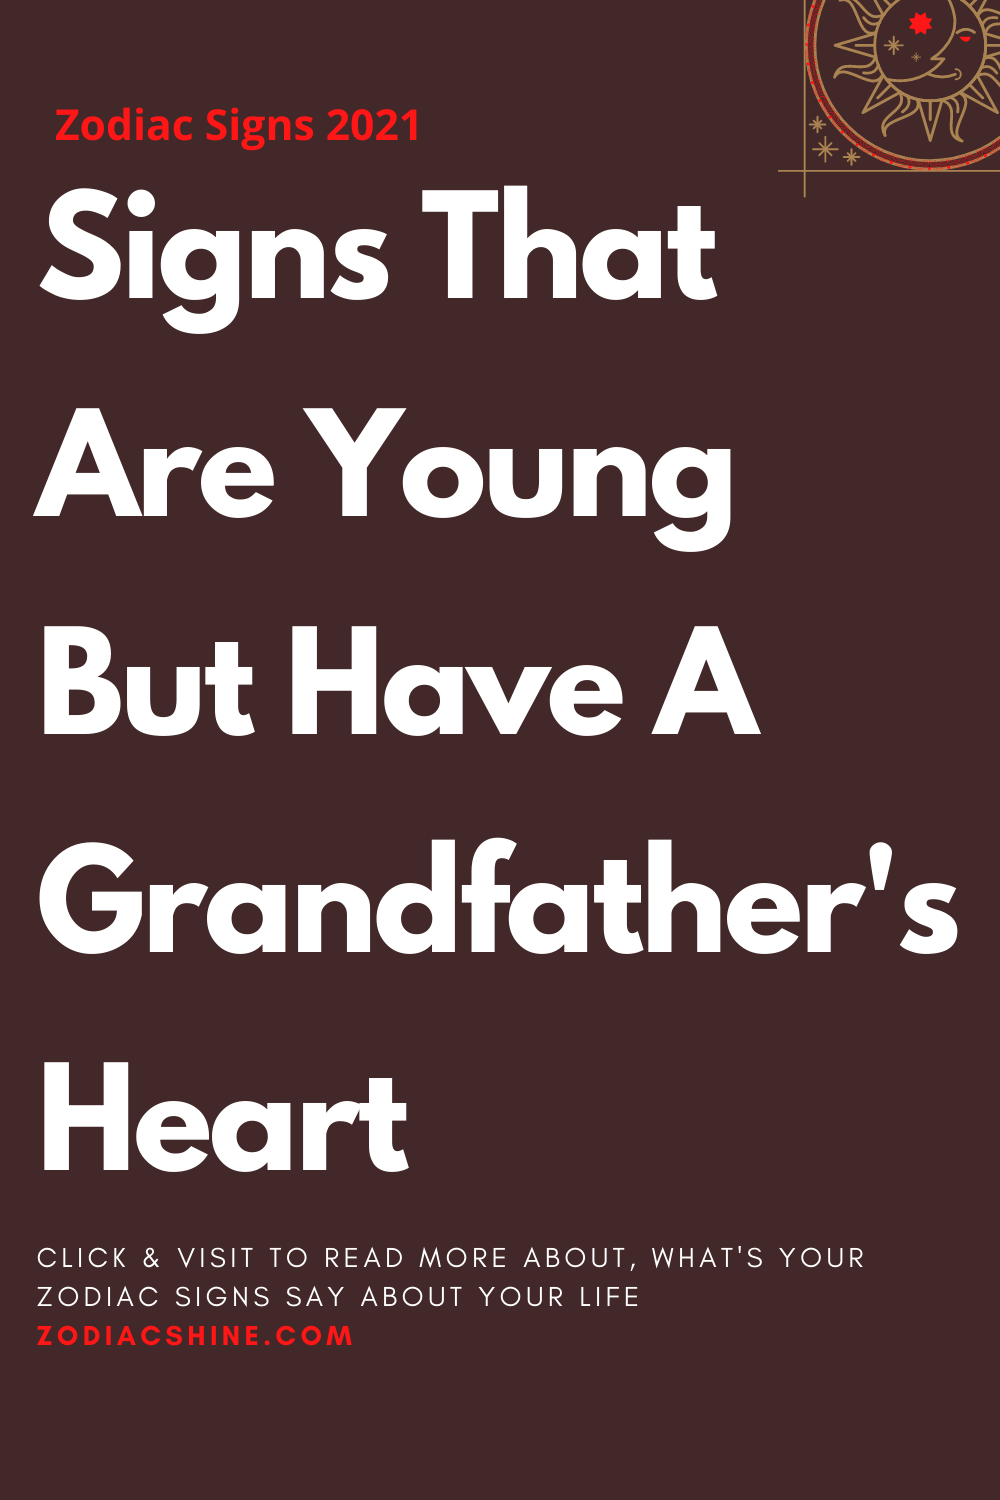 Signs That Are Young But Have A Grandfather's Heart